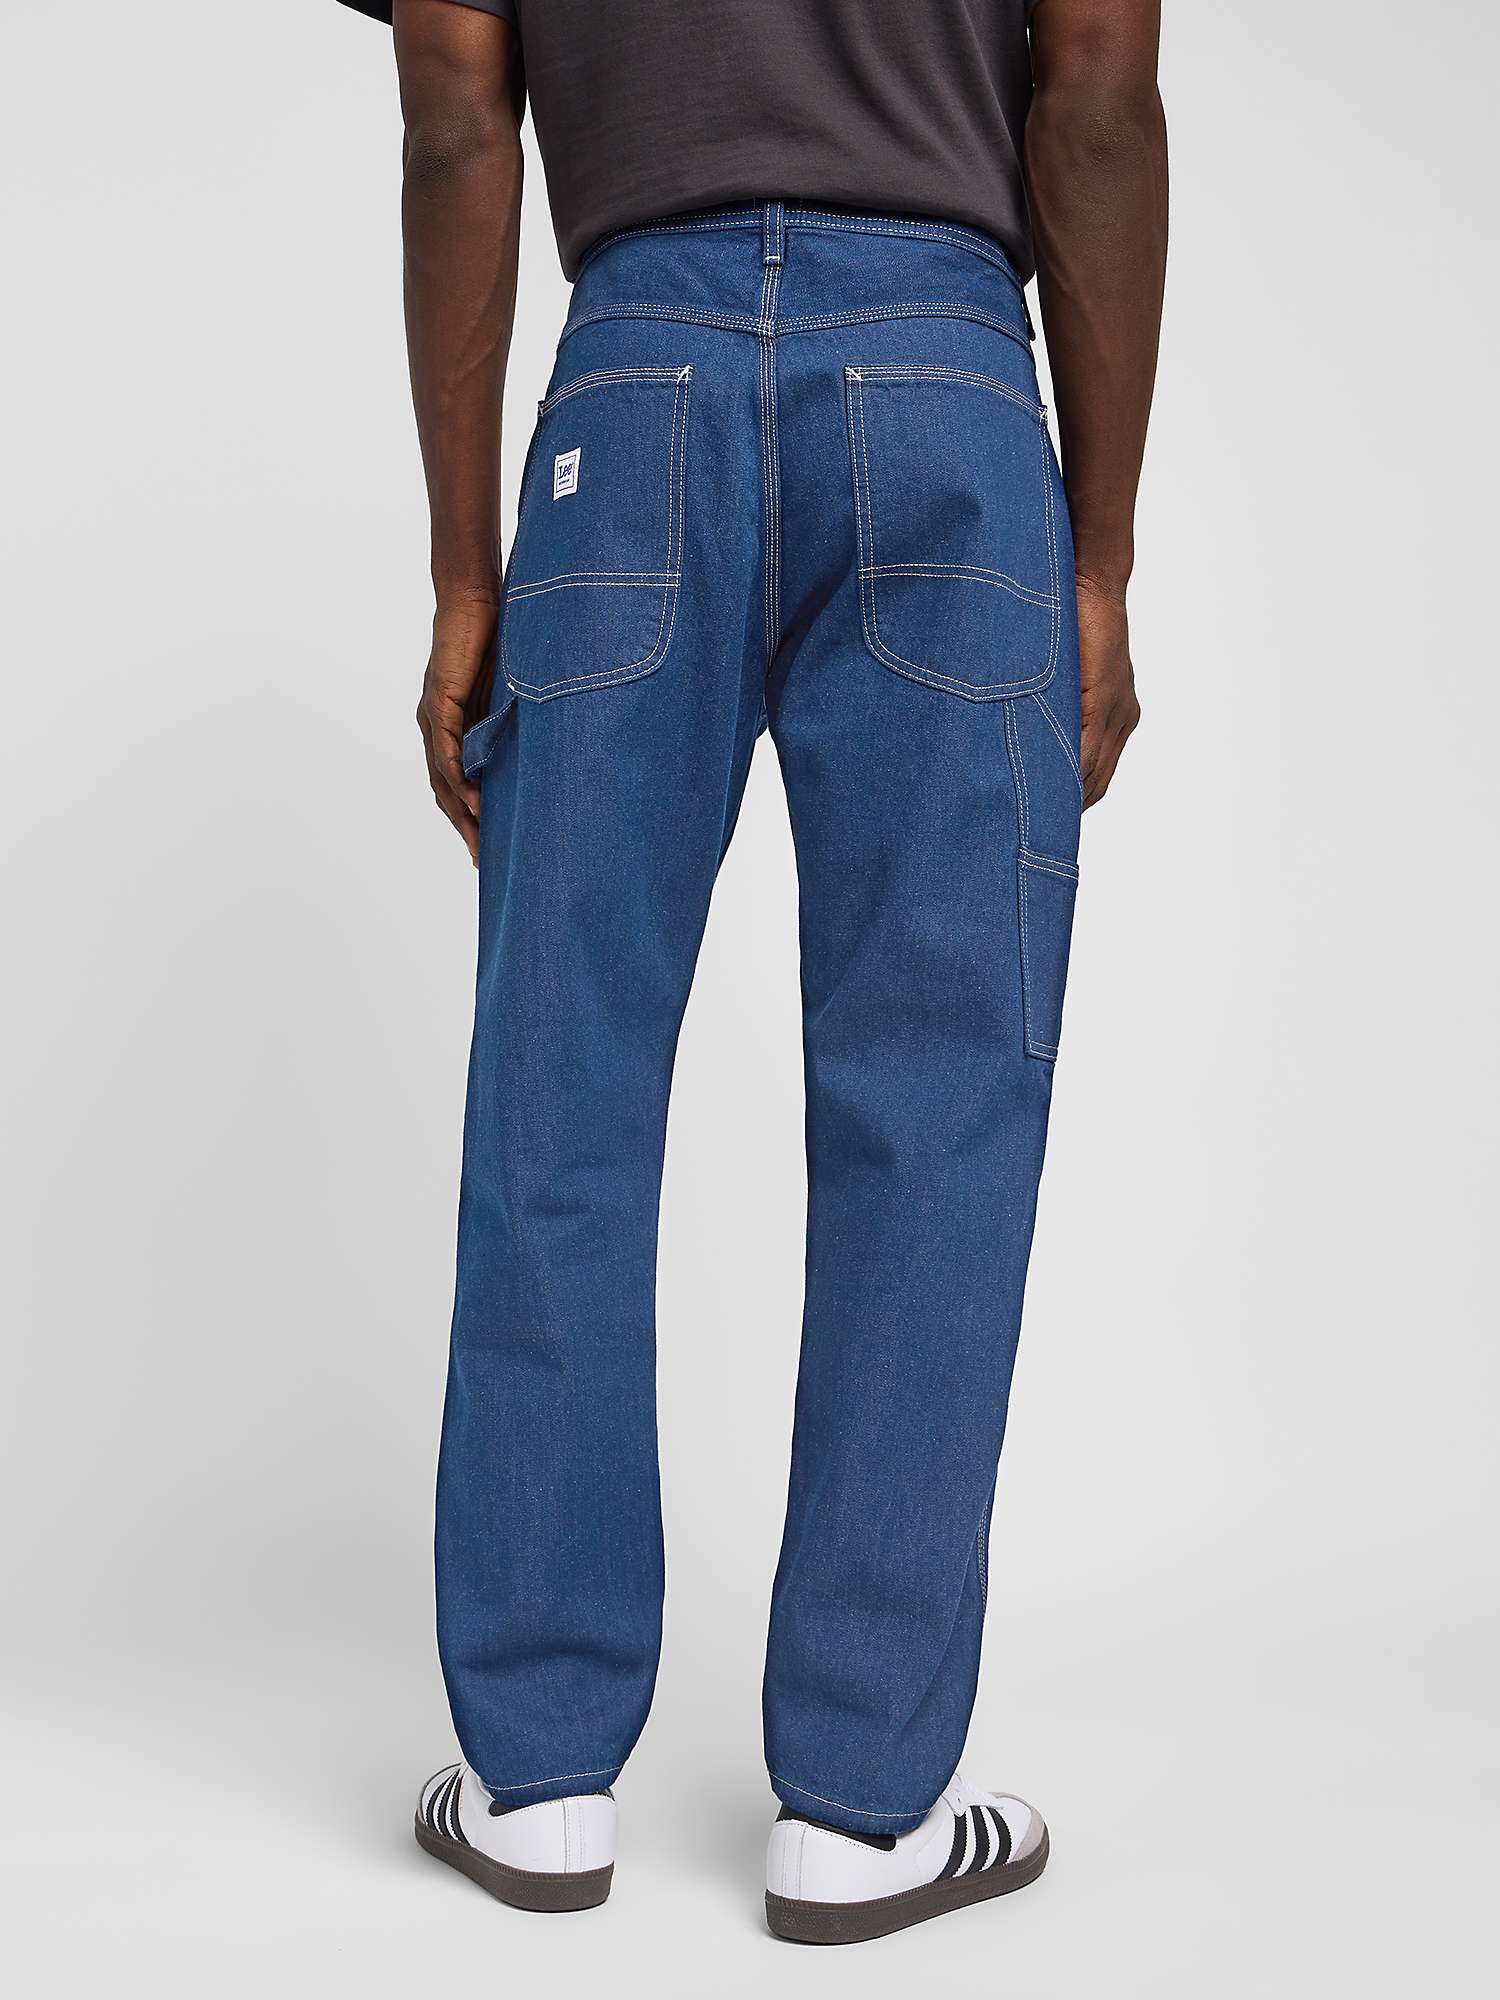 Buy Lee Carpenter Relaxed Fit Jeans, Blue Online at johnlewis.com